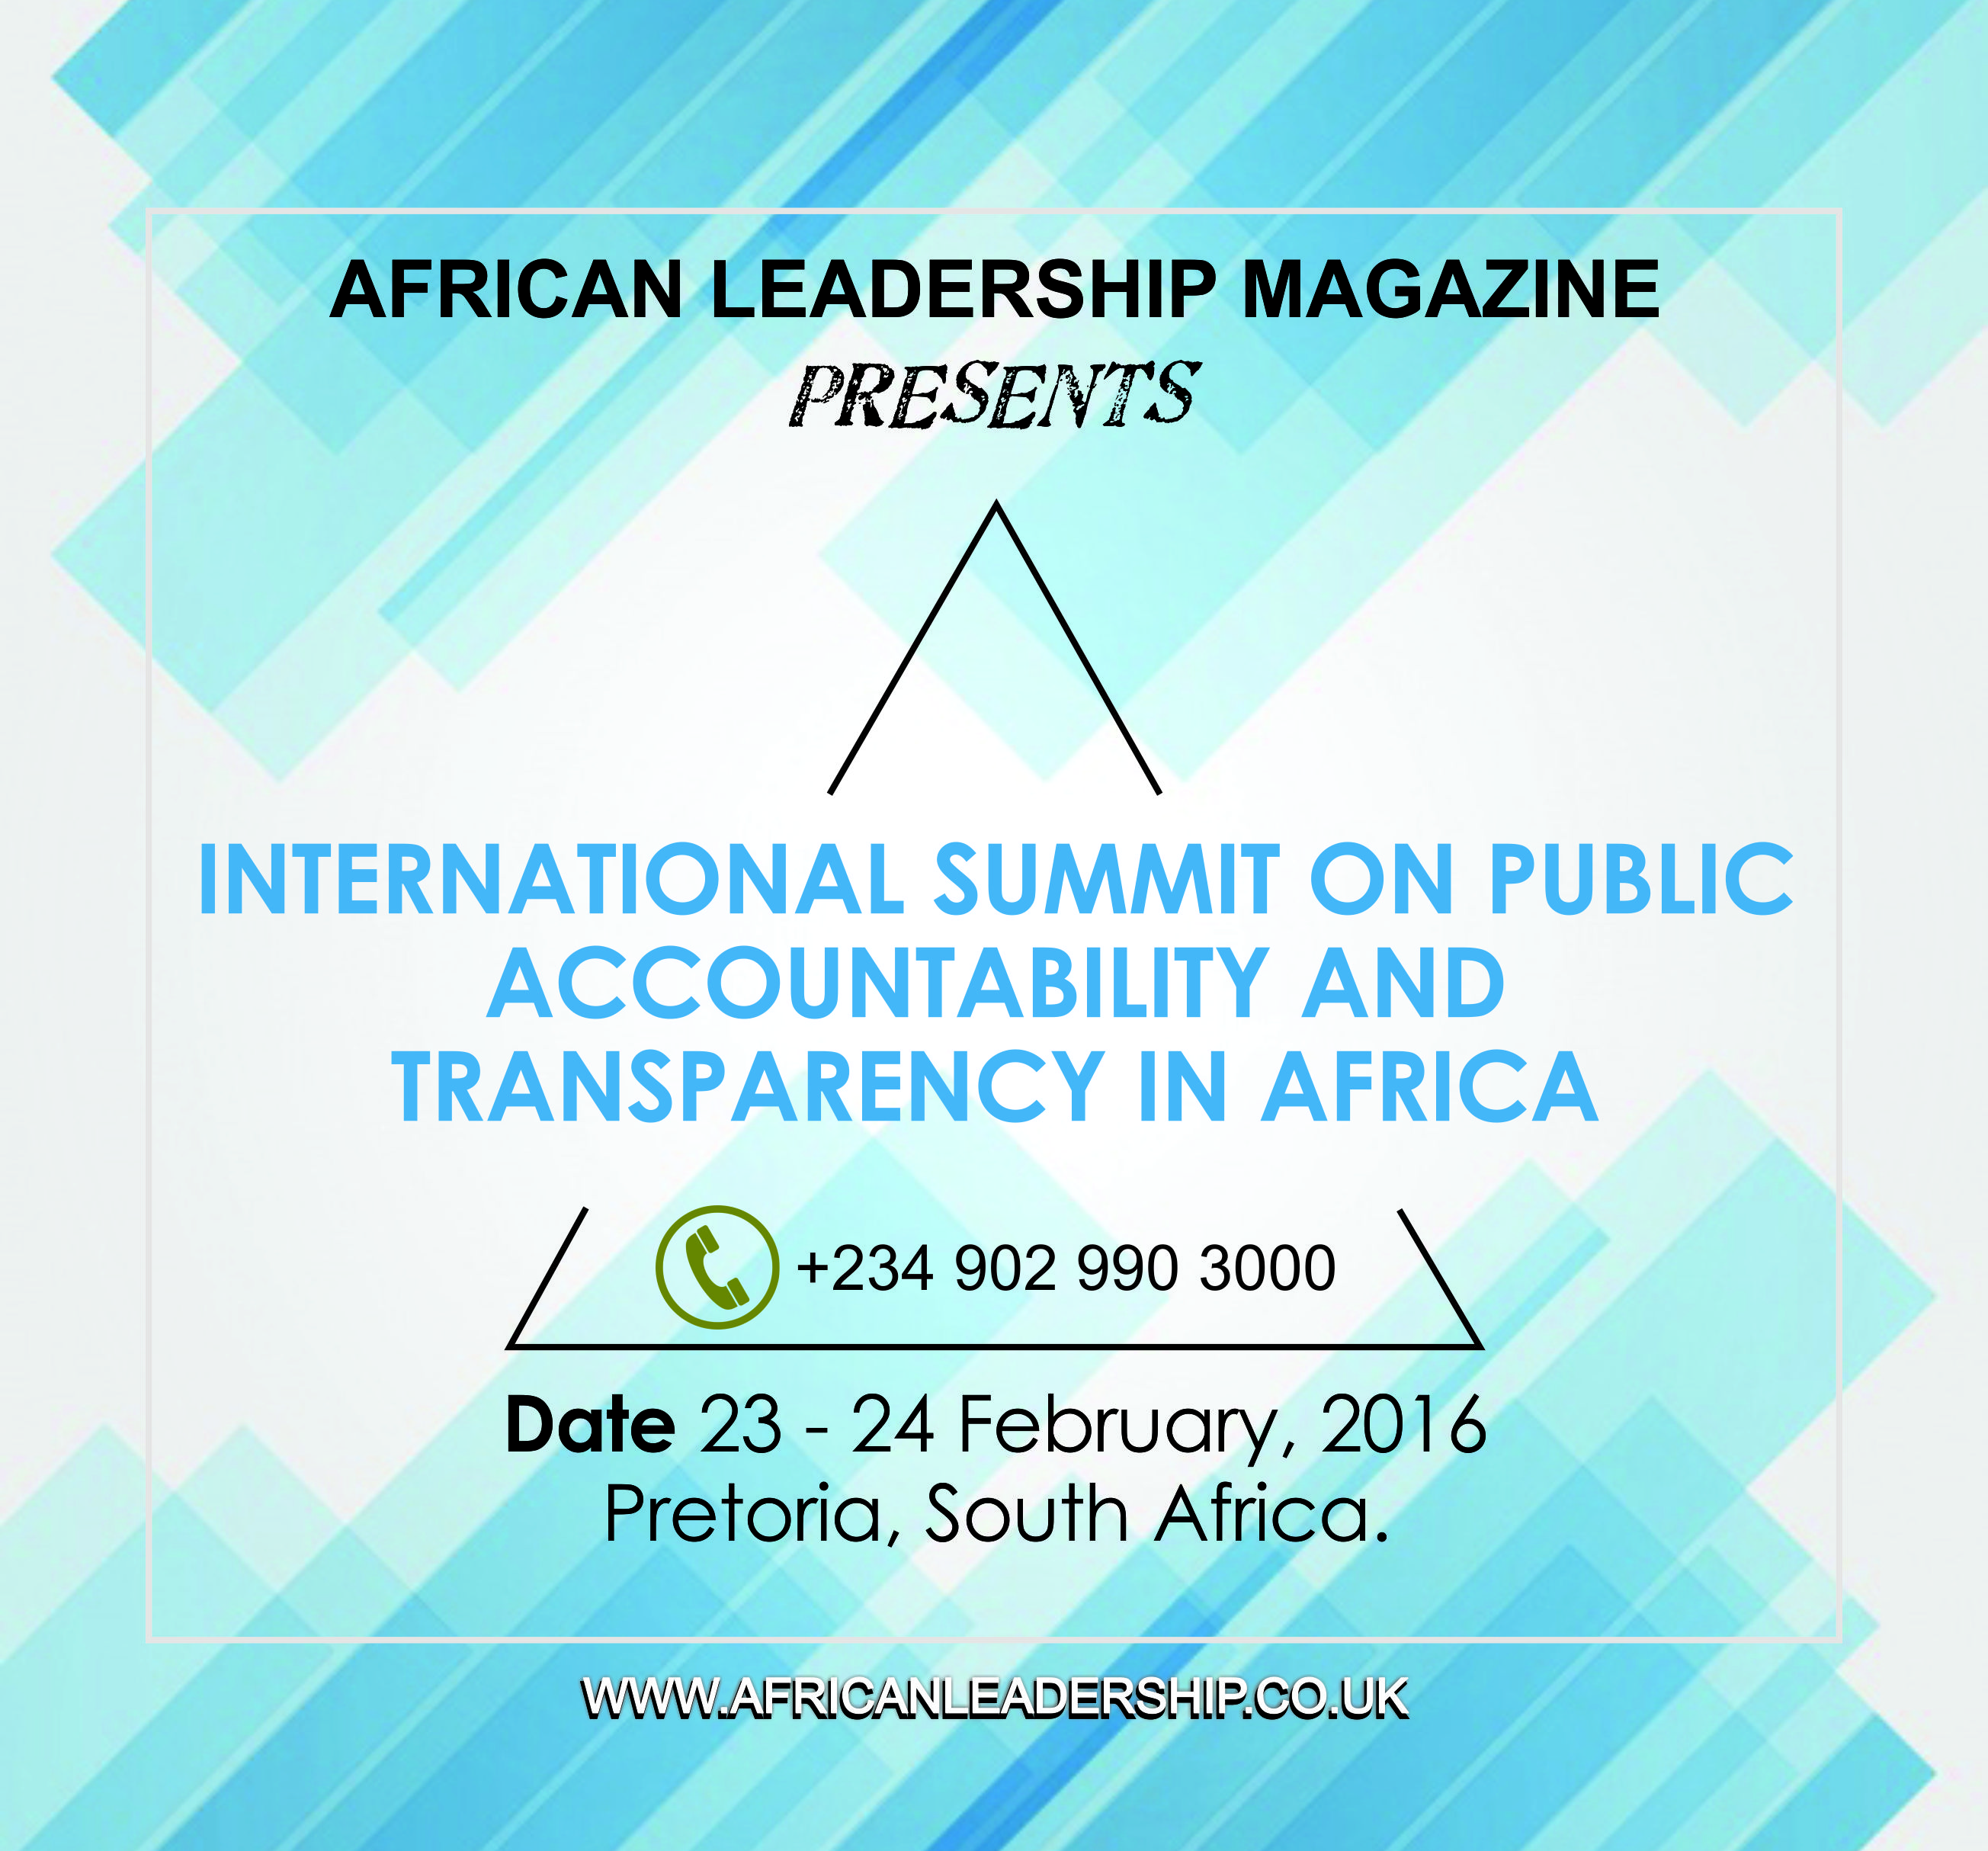 International Summit on Public Accountability and Transparency in Africa